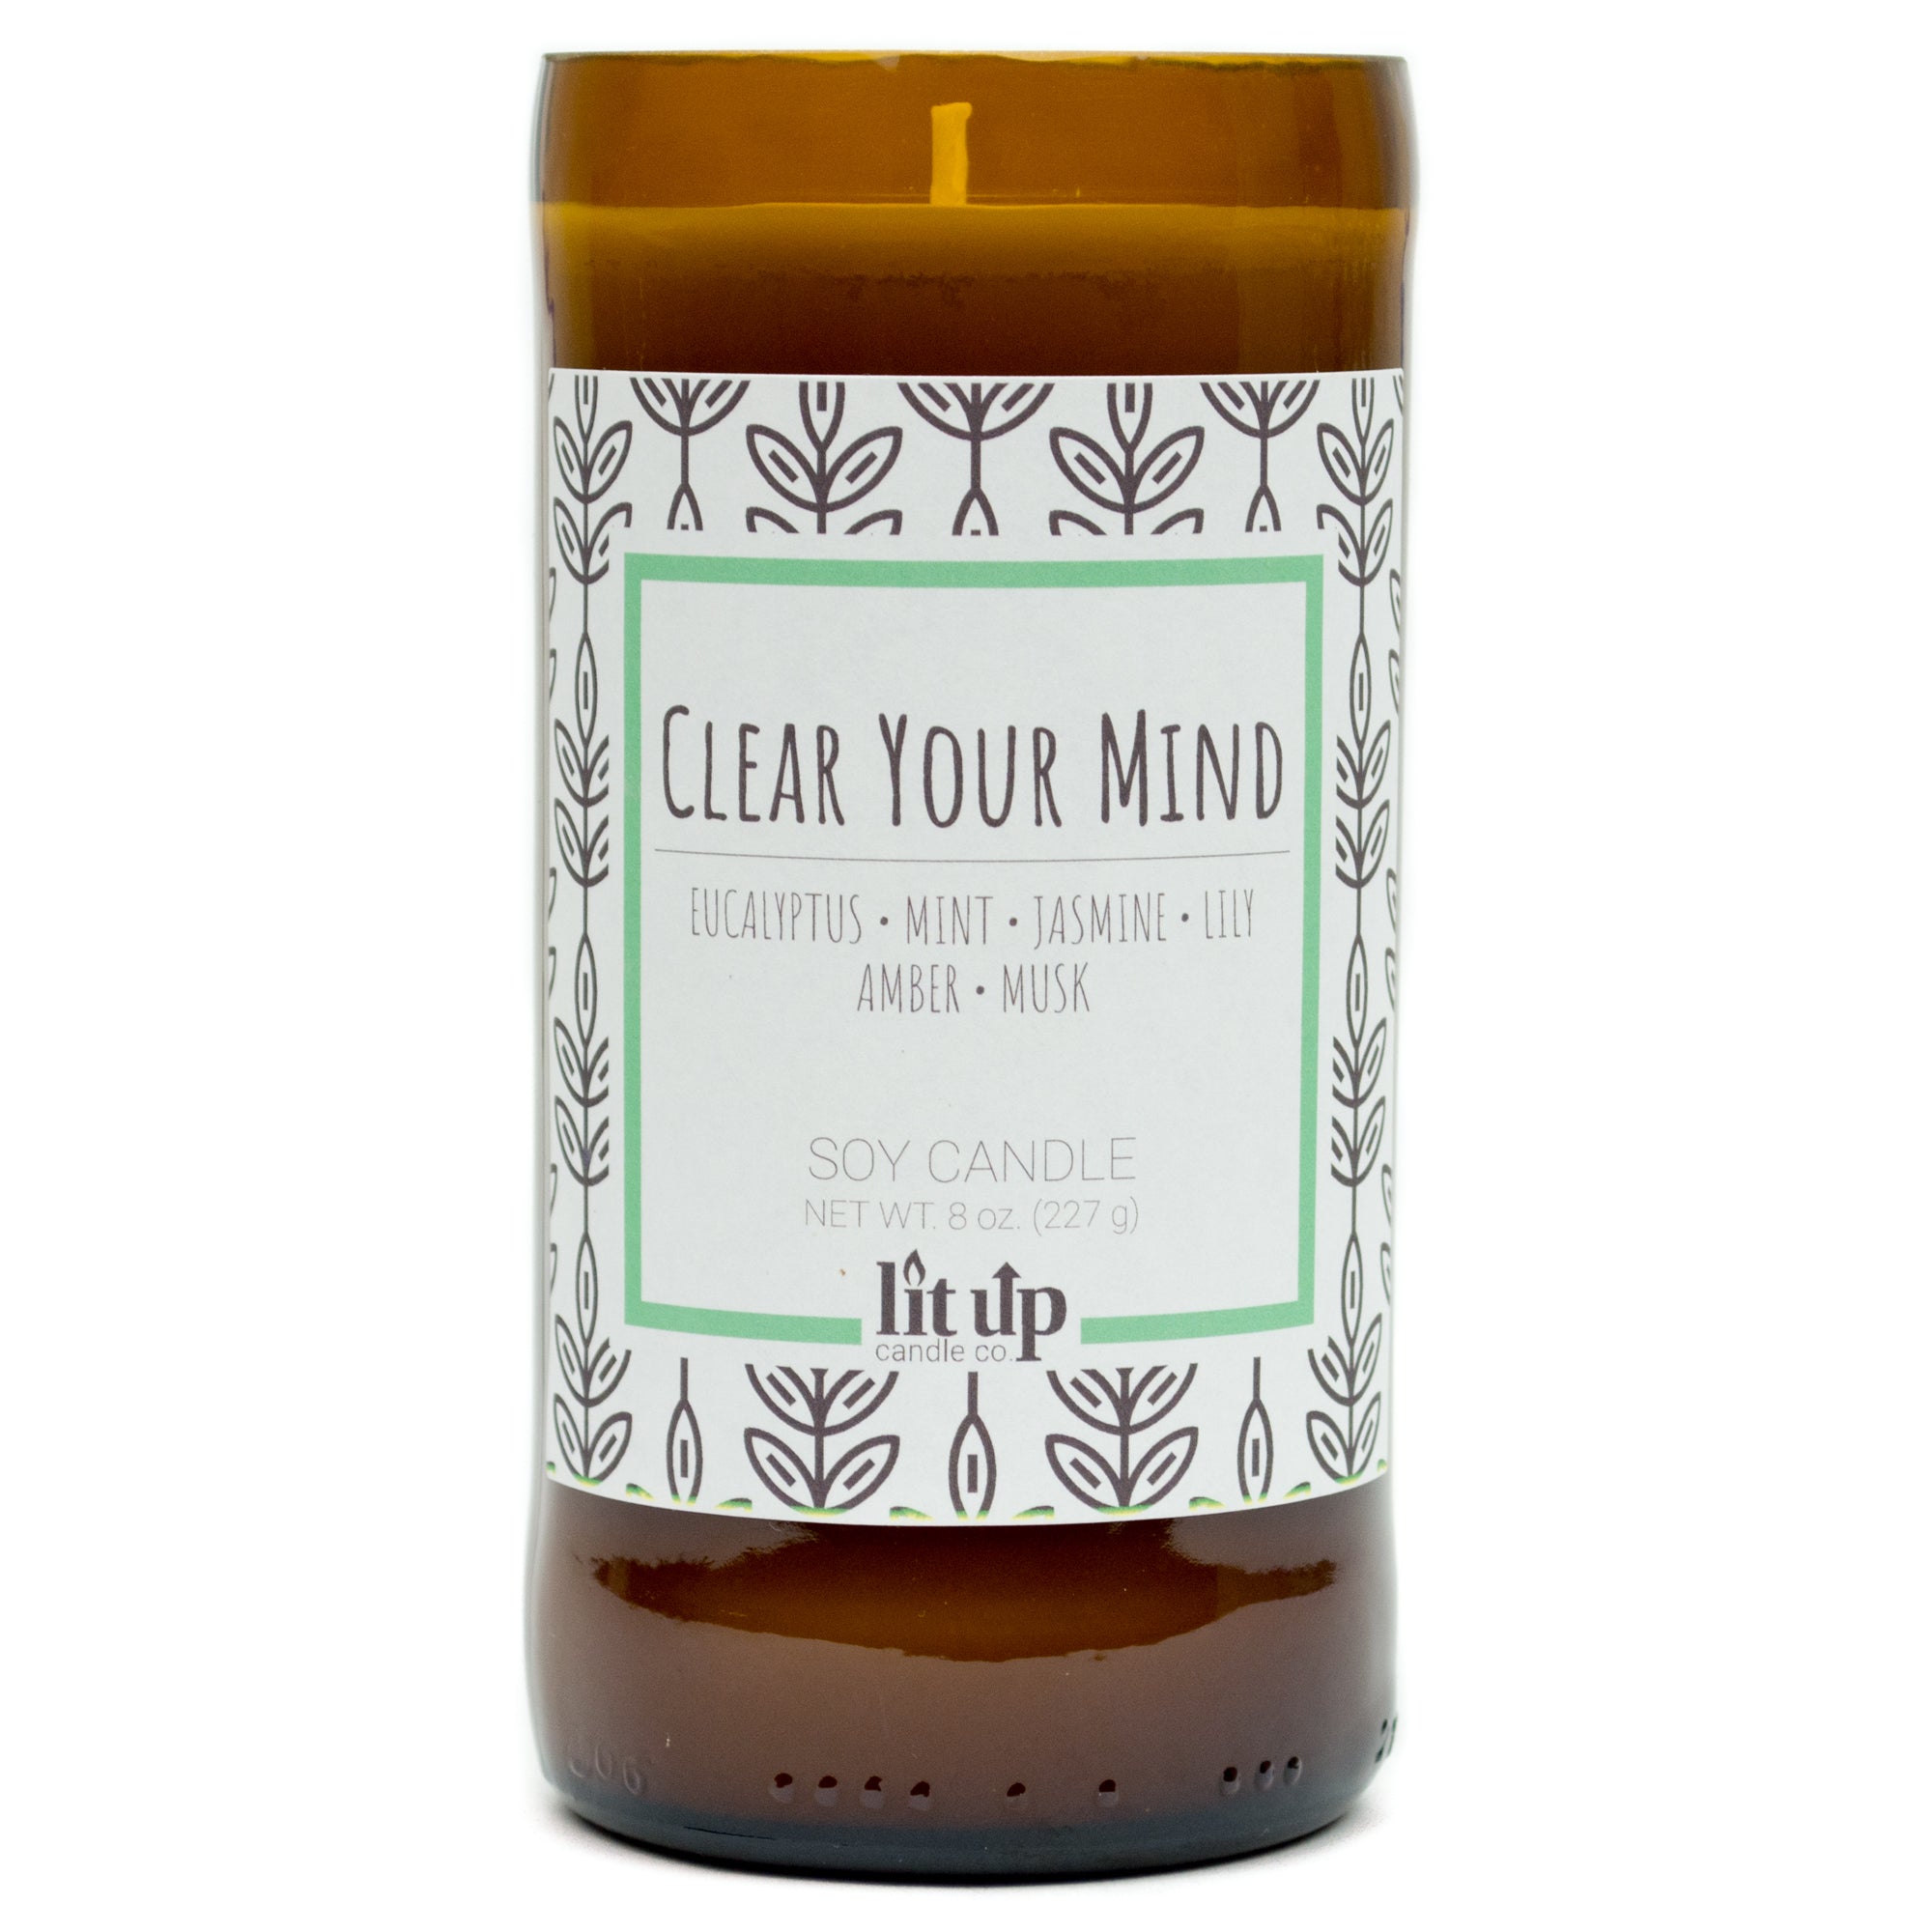 Clear Your Mind scented 8 oz. soy candle in upcycled beer bottle - FKA Eucalyptus Spearmint